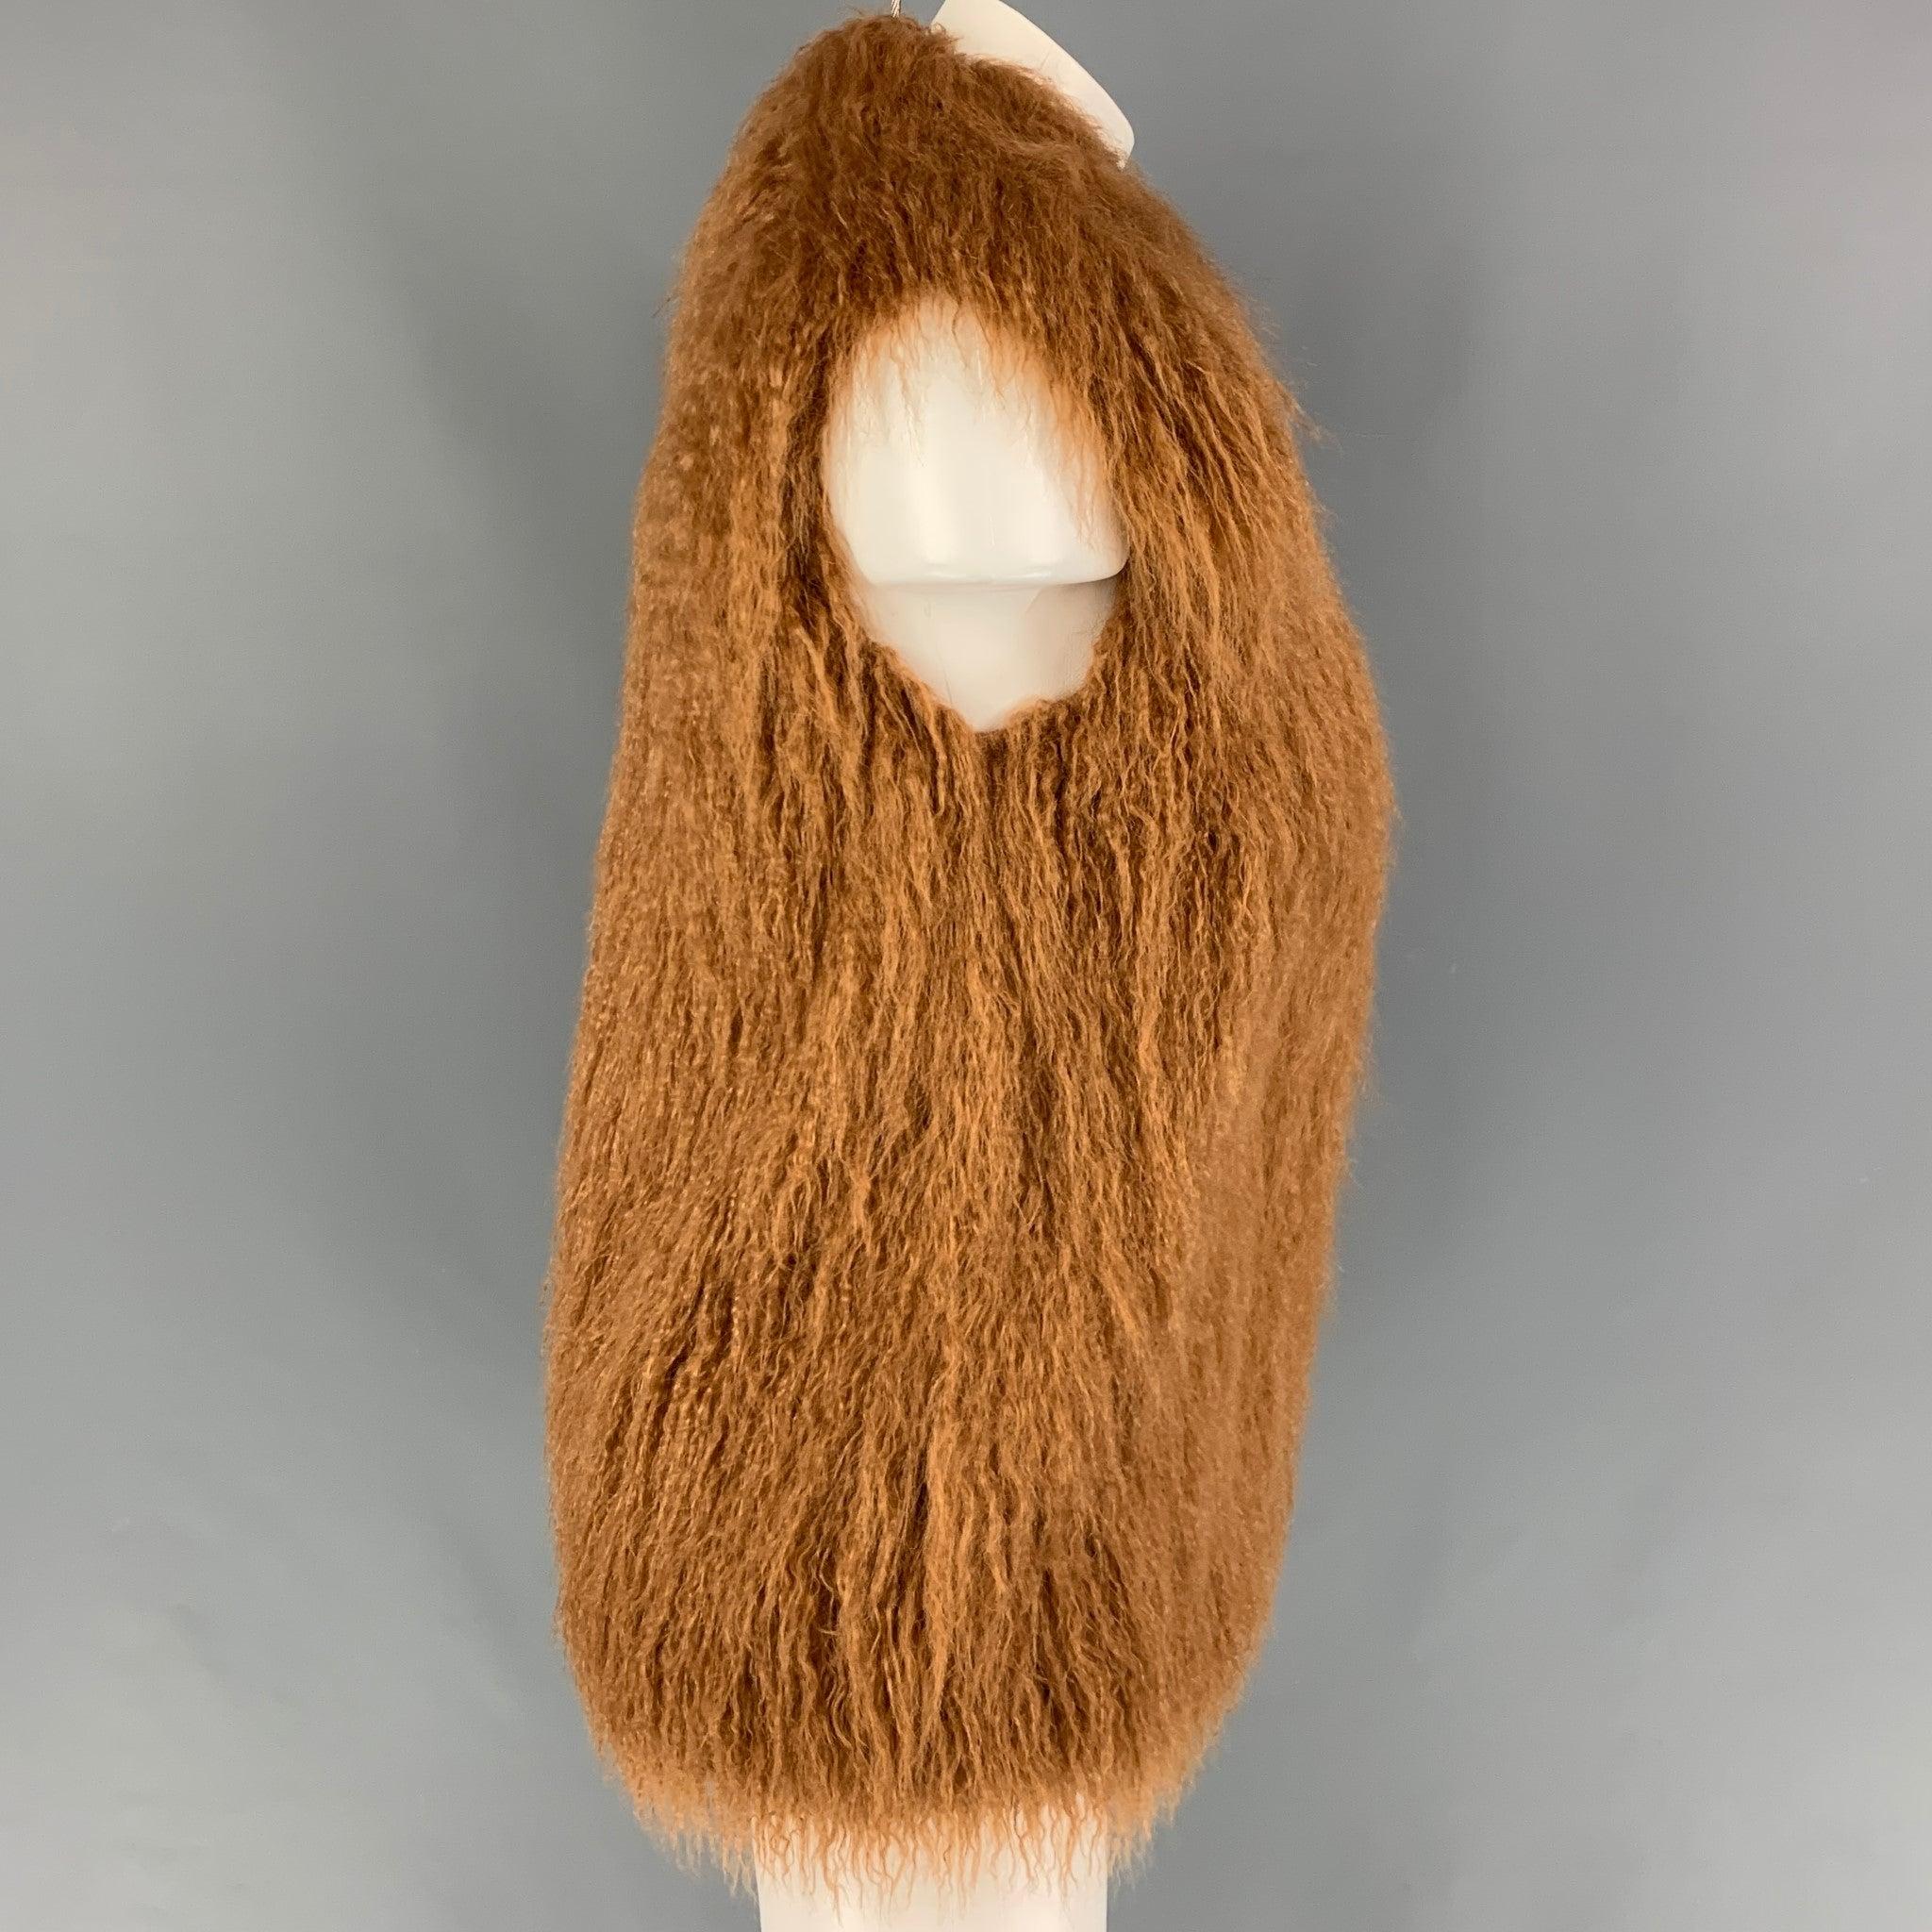 STELLA McCARTNEY 2015 'Fur Free Fur' vest comes in a brown faux fur with a full liner featuring a large collar, slit pockets, and a hook & loop closure. Made in Hungary. Excellent
Pre-Owned Condition. 

Marked:   36 

Measurements: 
 
Shoulder:12